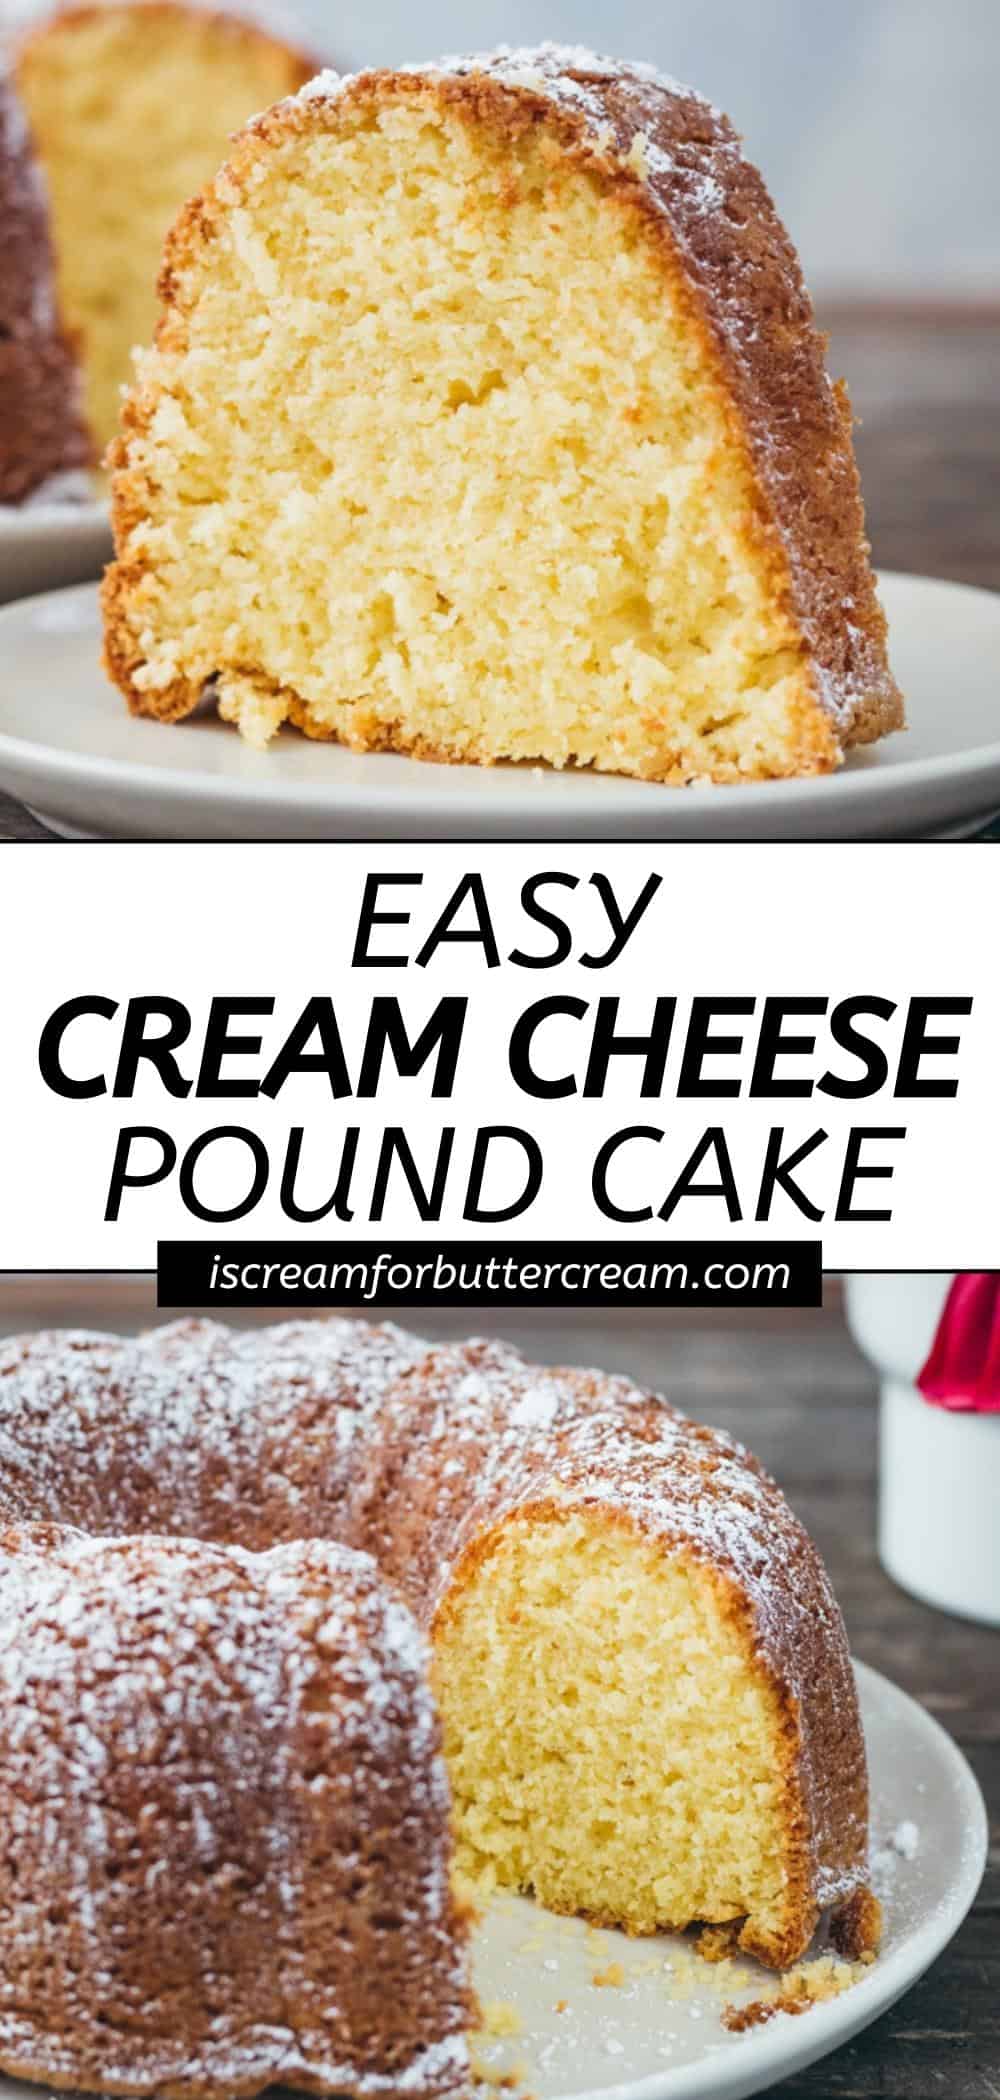 Pinterest graphic with two images of pound cake slices.